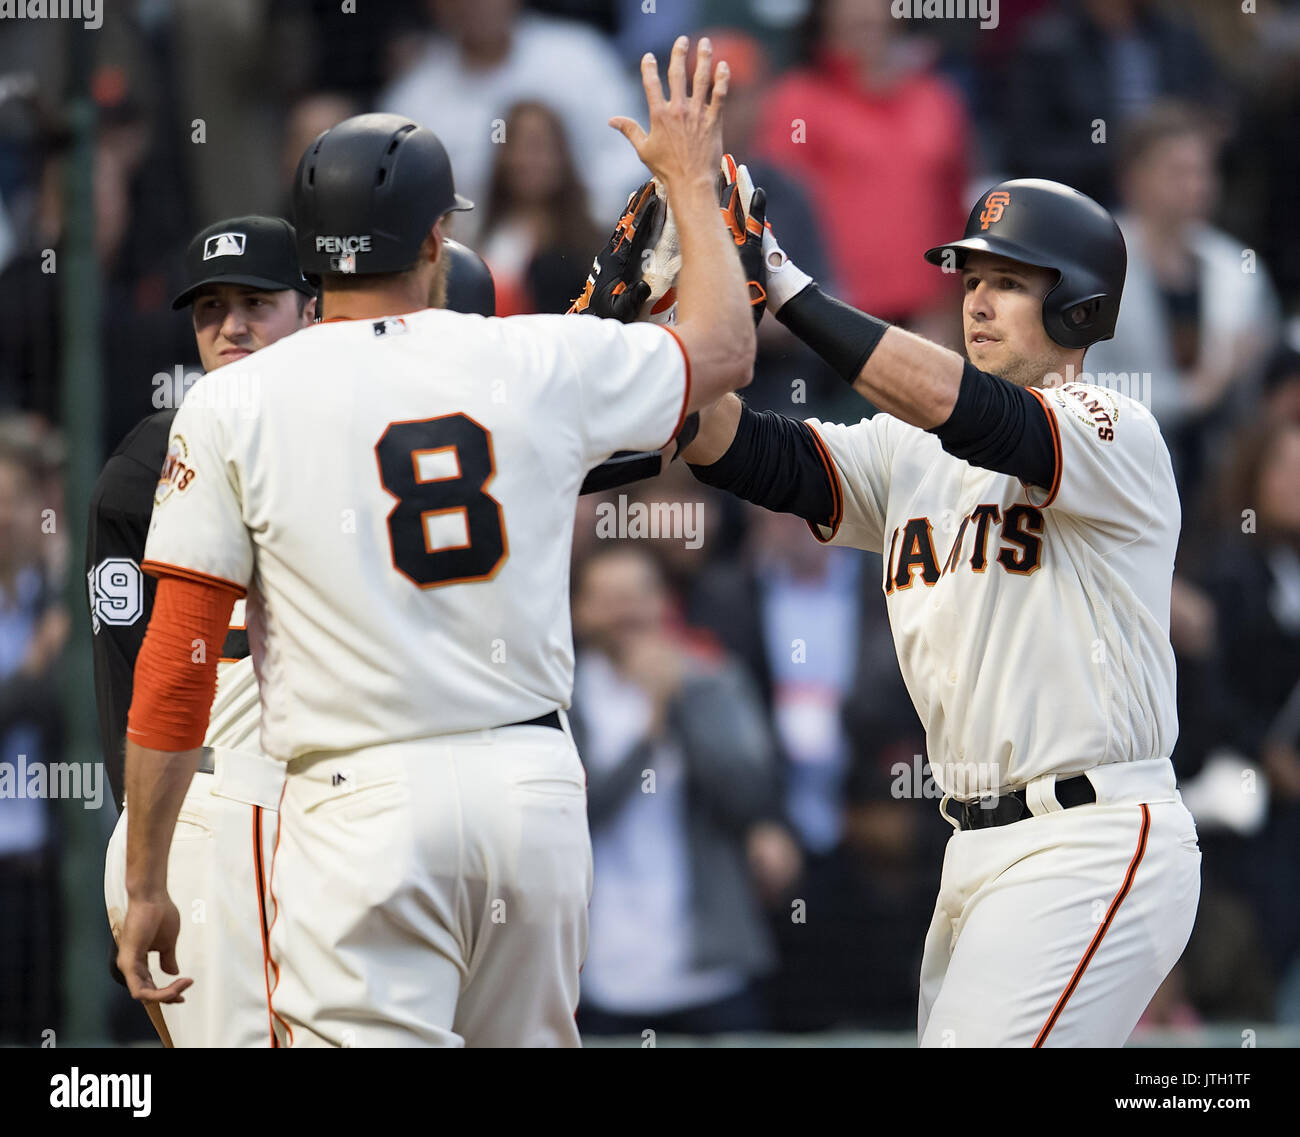 San Francisco, California, USA. 08th Aug, 2017. San Francisco Giants first baseman Buster Posey (28) gets high fives for his first inning three run home run, during a MLB game between the Chicago Cubs and the San Francisco Giants at AT&T Park in San Francisco, California. Credit: Cal Sport Media/Alamy Live News Stock Photo